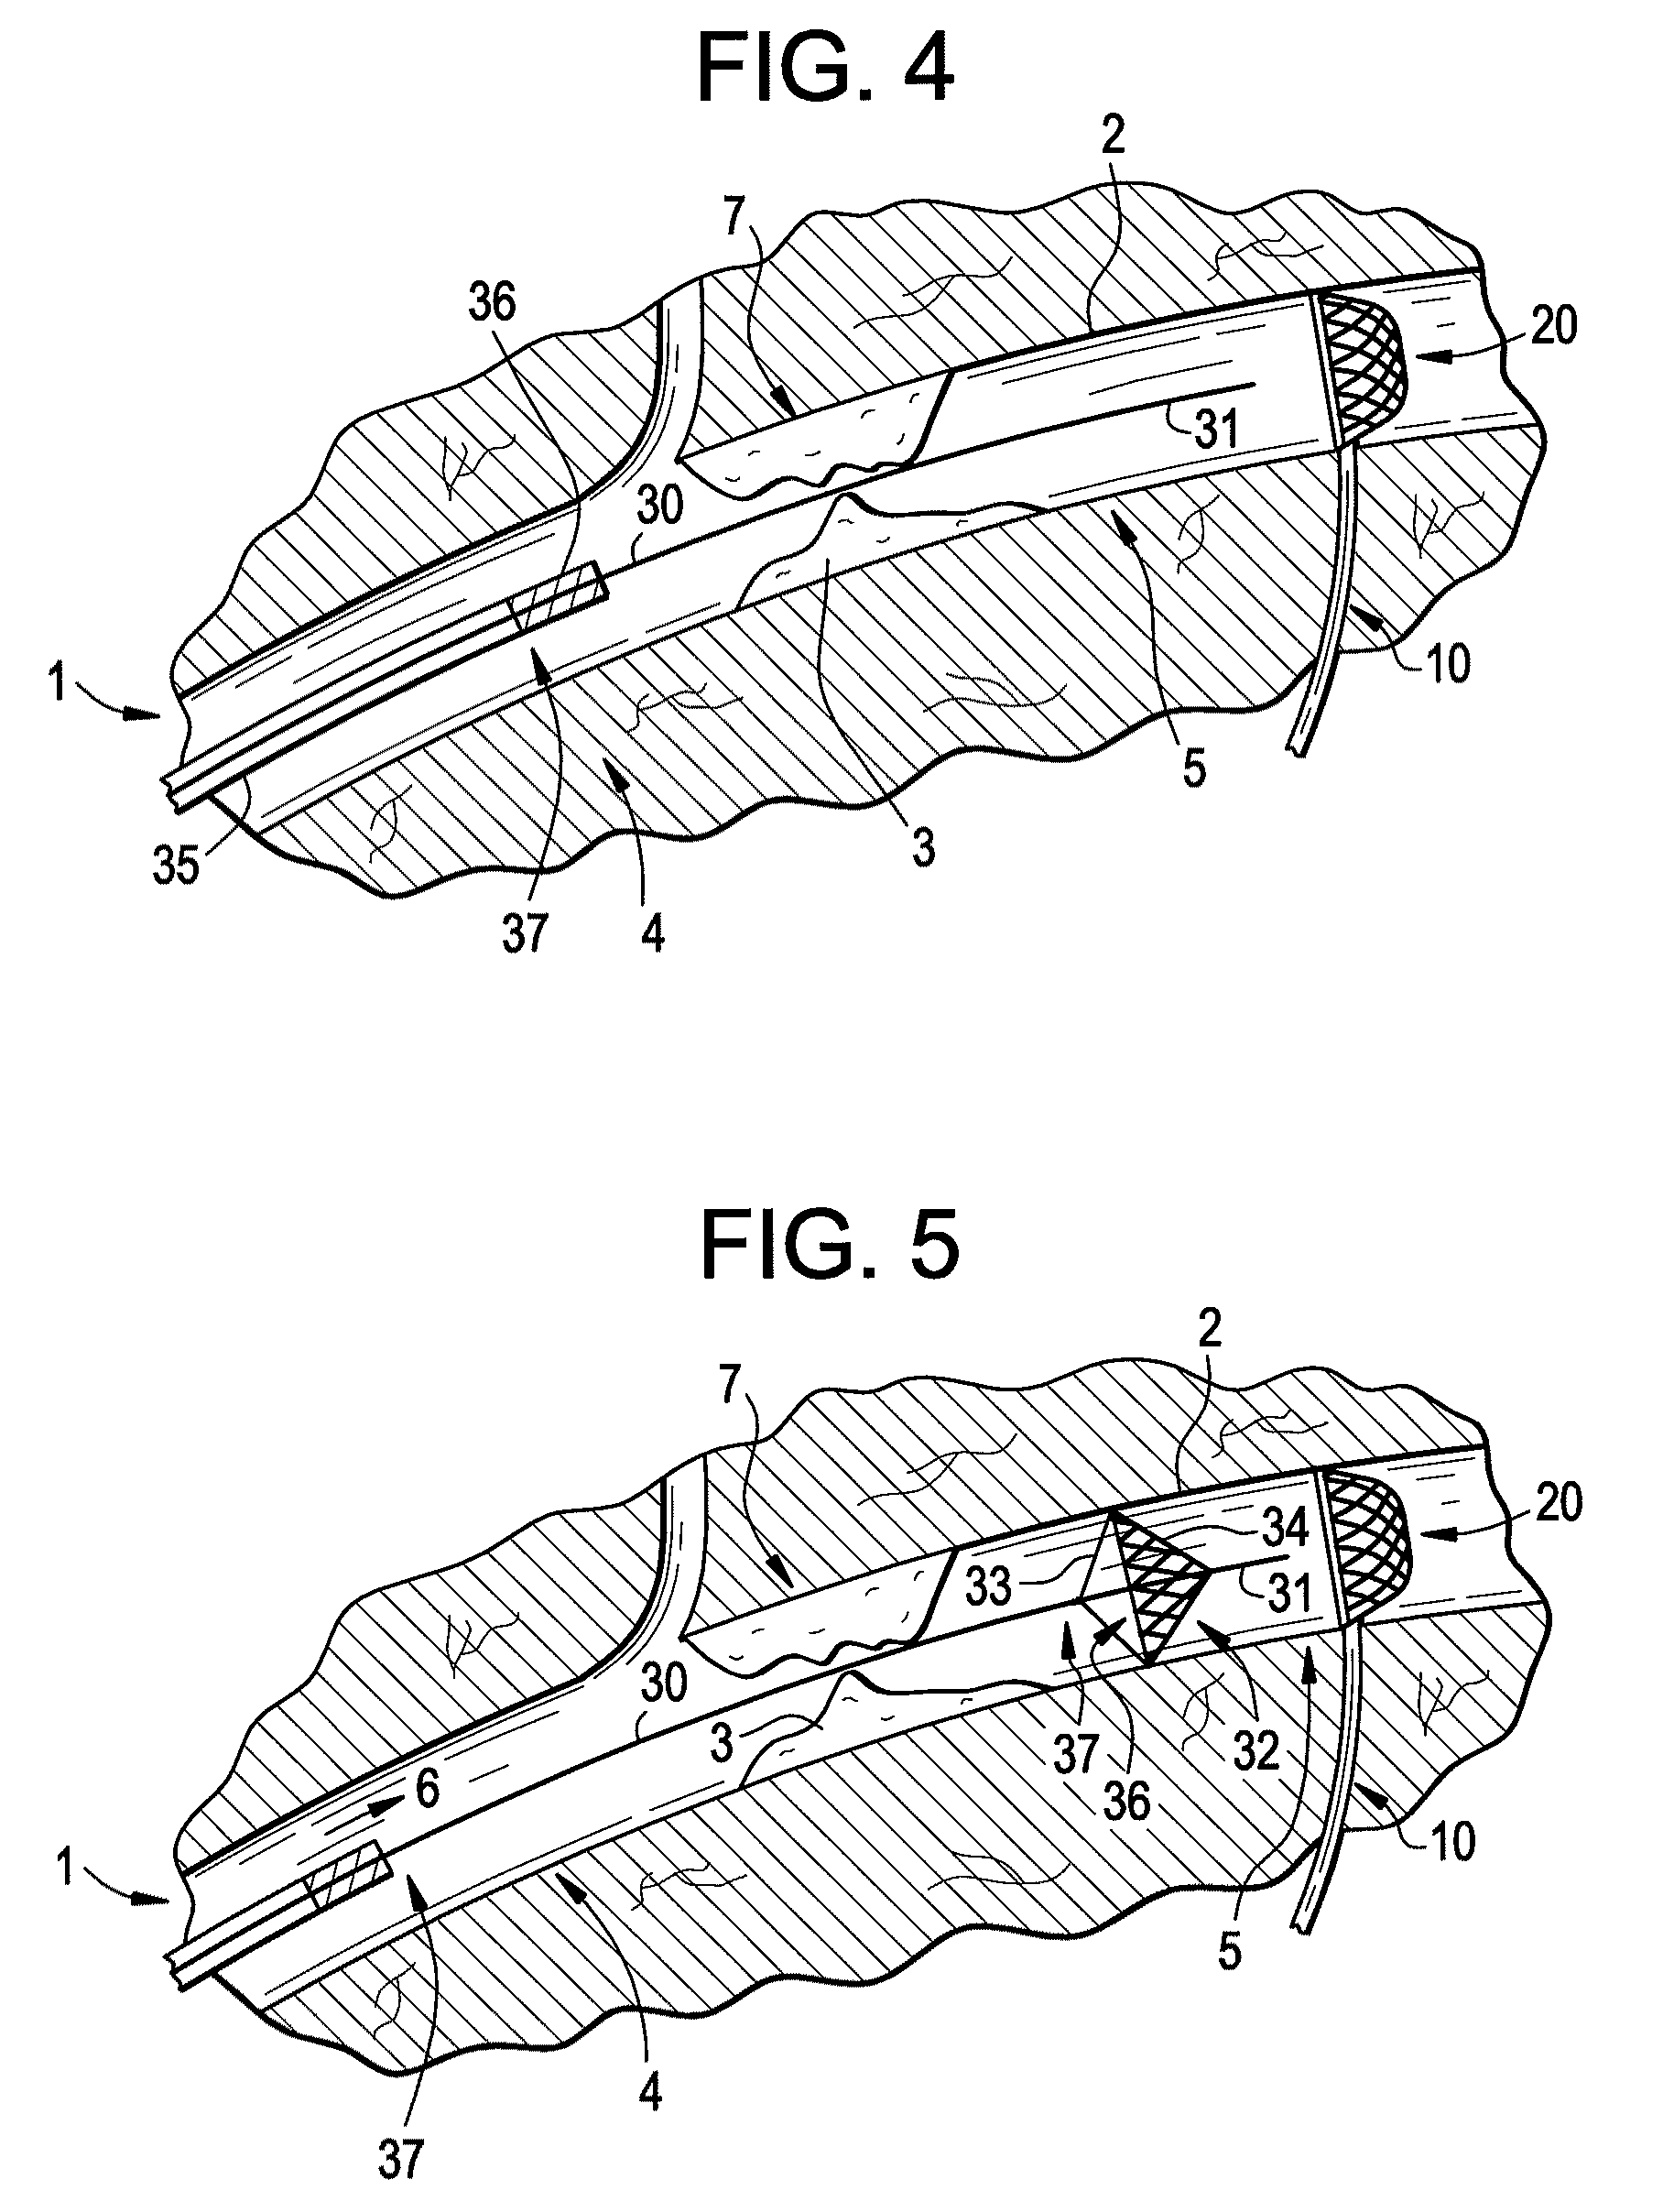 Distal access embolic protection system and methods of using the same